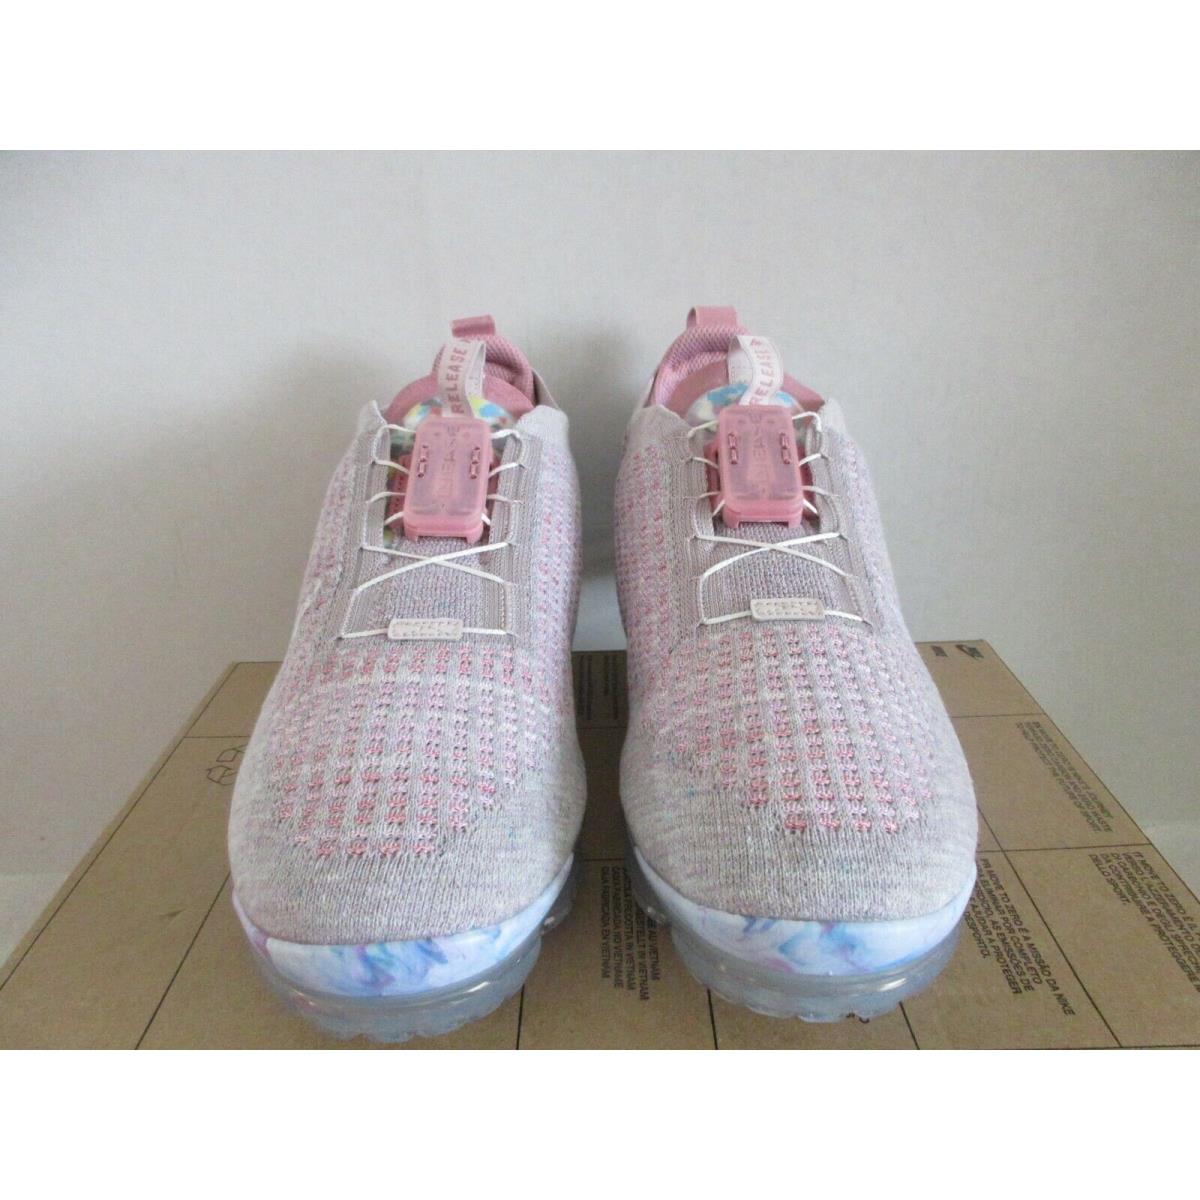 Nike shoes Air Vapormax Flyknit - Pink 1